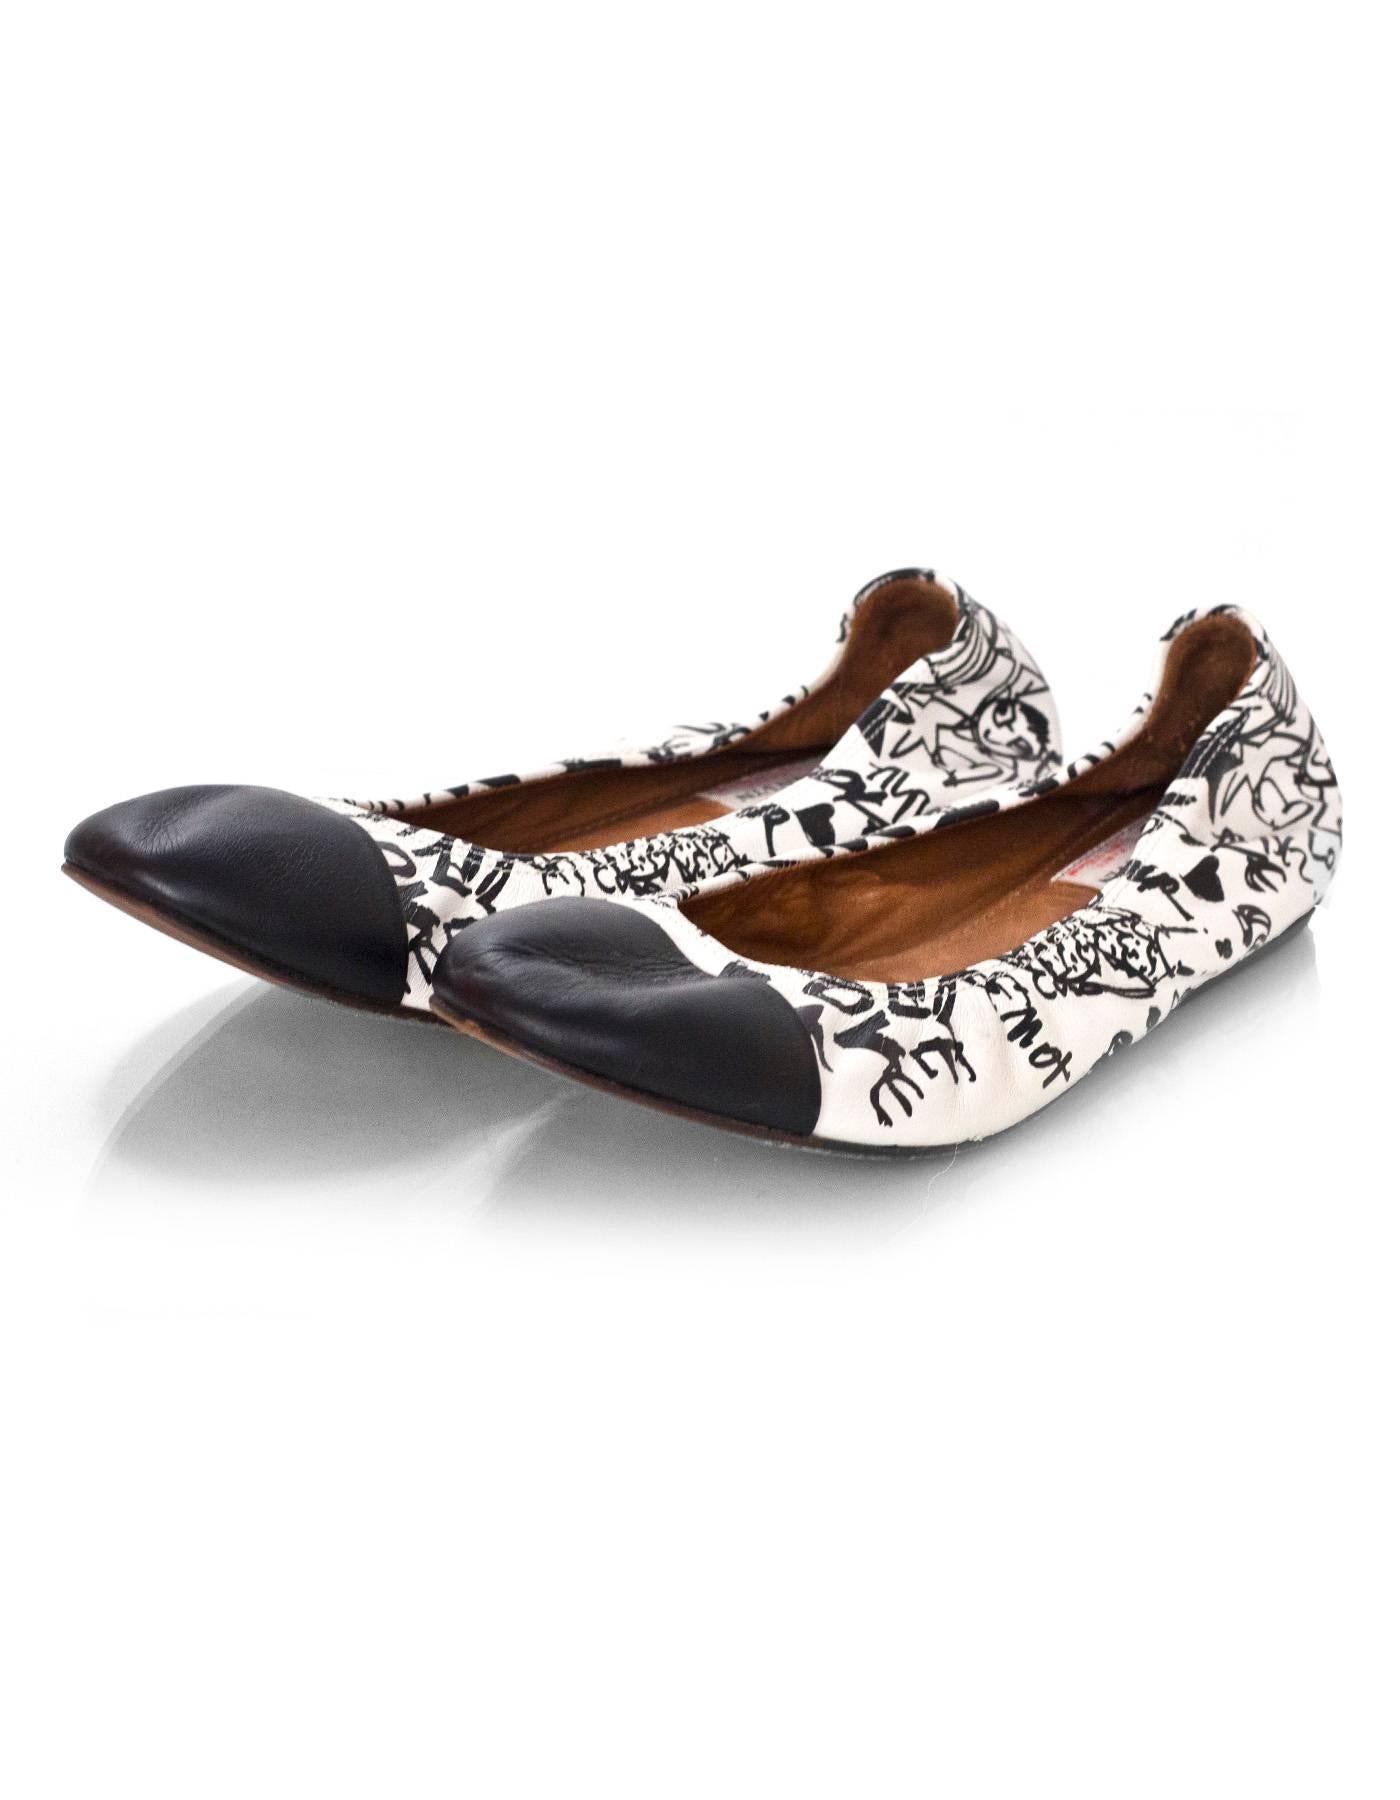 Lanvin Black & White Leather Graffiti Flats

Made In: Portugal
Color: Black, white
Materials: Leather
Closure/Opening: Slide on
Sole Stamp: Lanvin Paris
Overall Condition: Excellent pre-owned condition, light wear at outsoles
Marked Size: Not